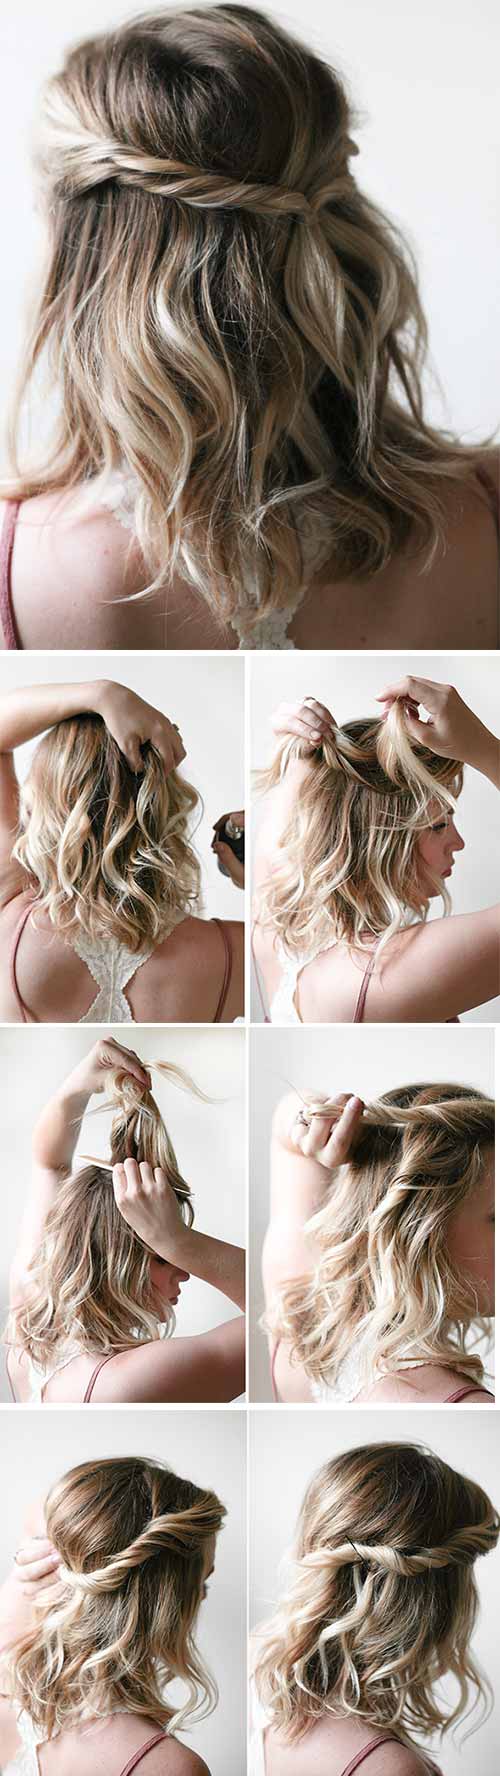 25 Easy Hairstyles for Short Hair in 2021 | Who What Wear